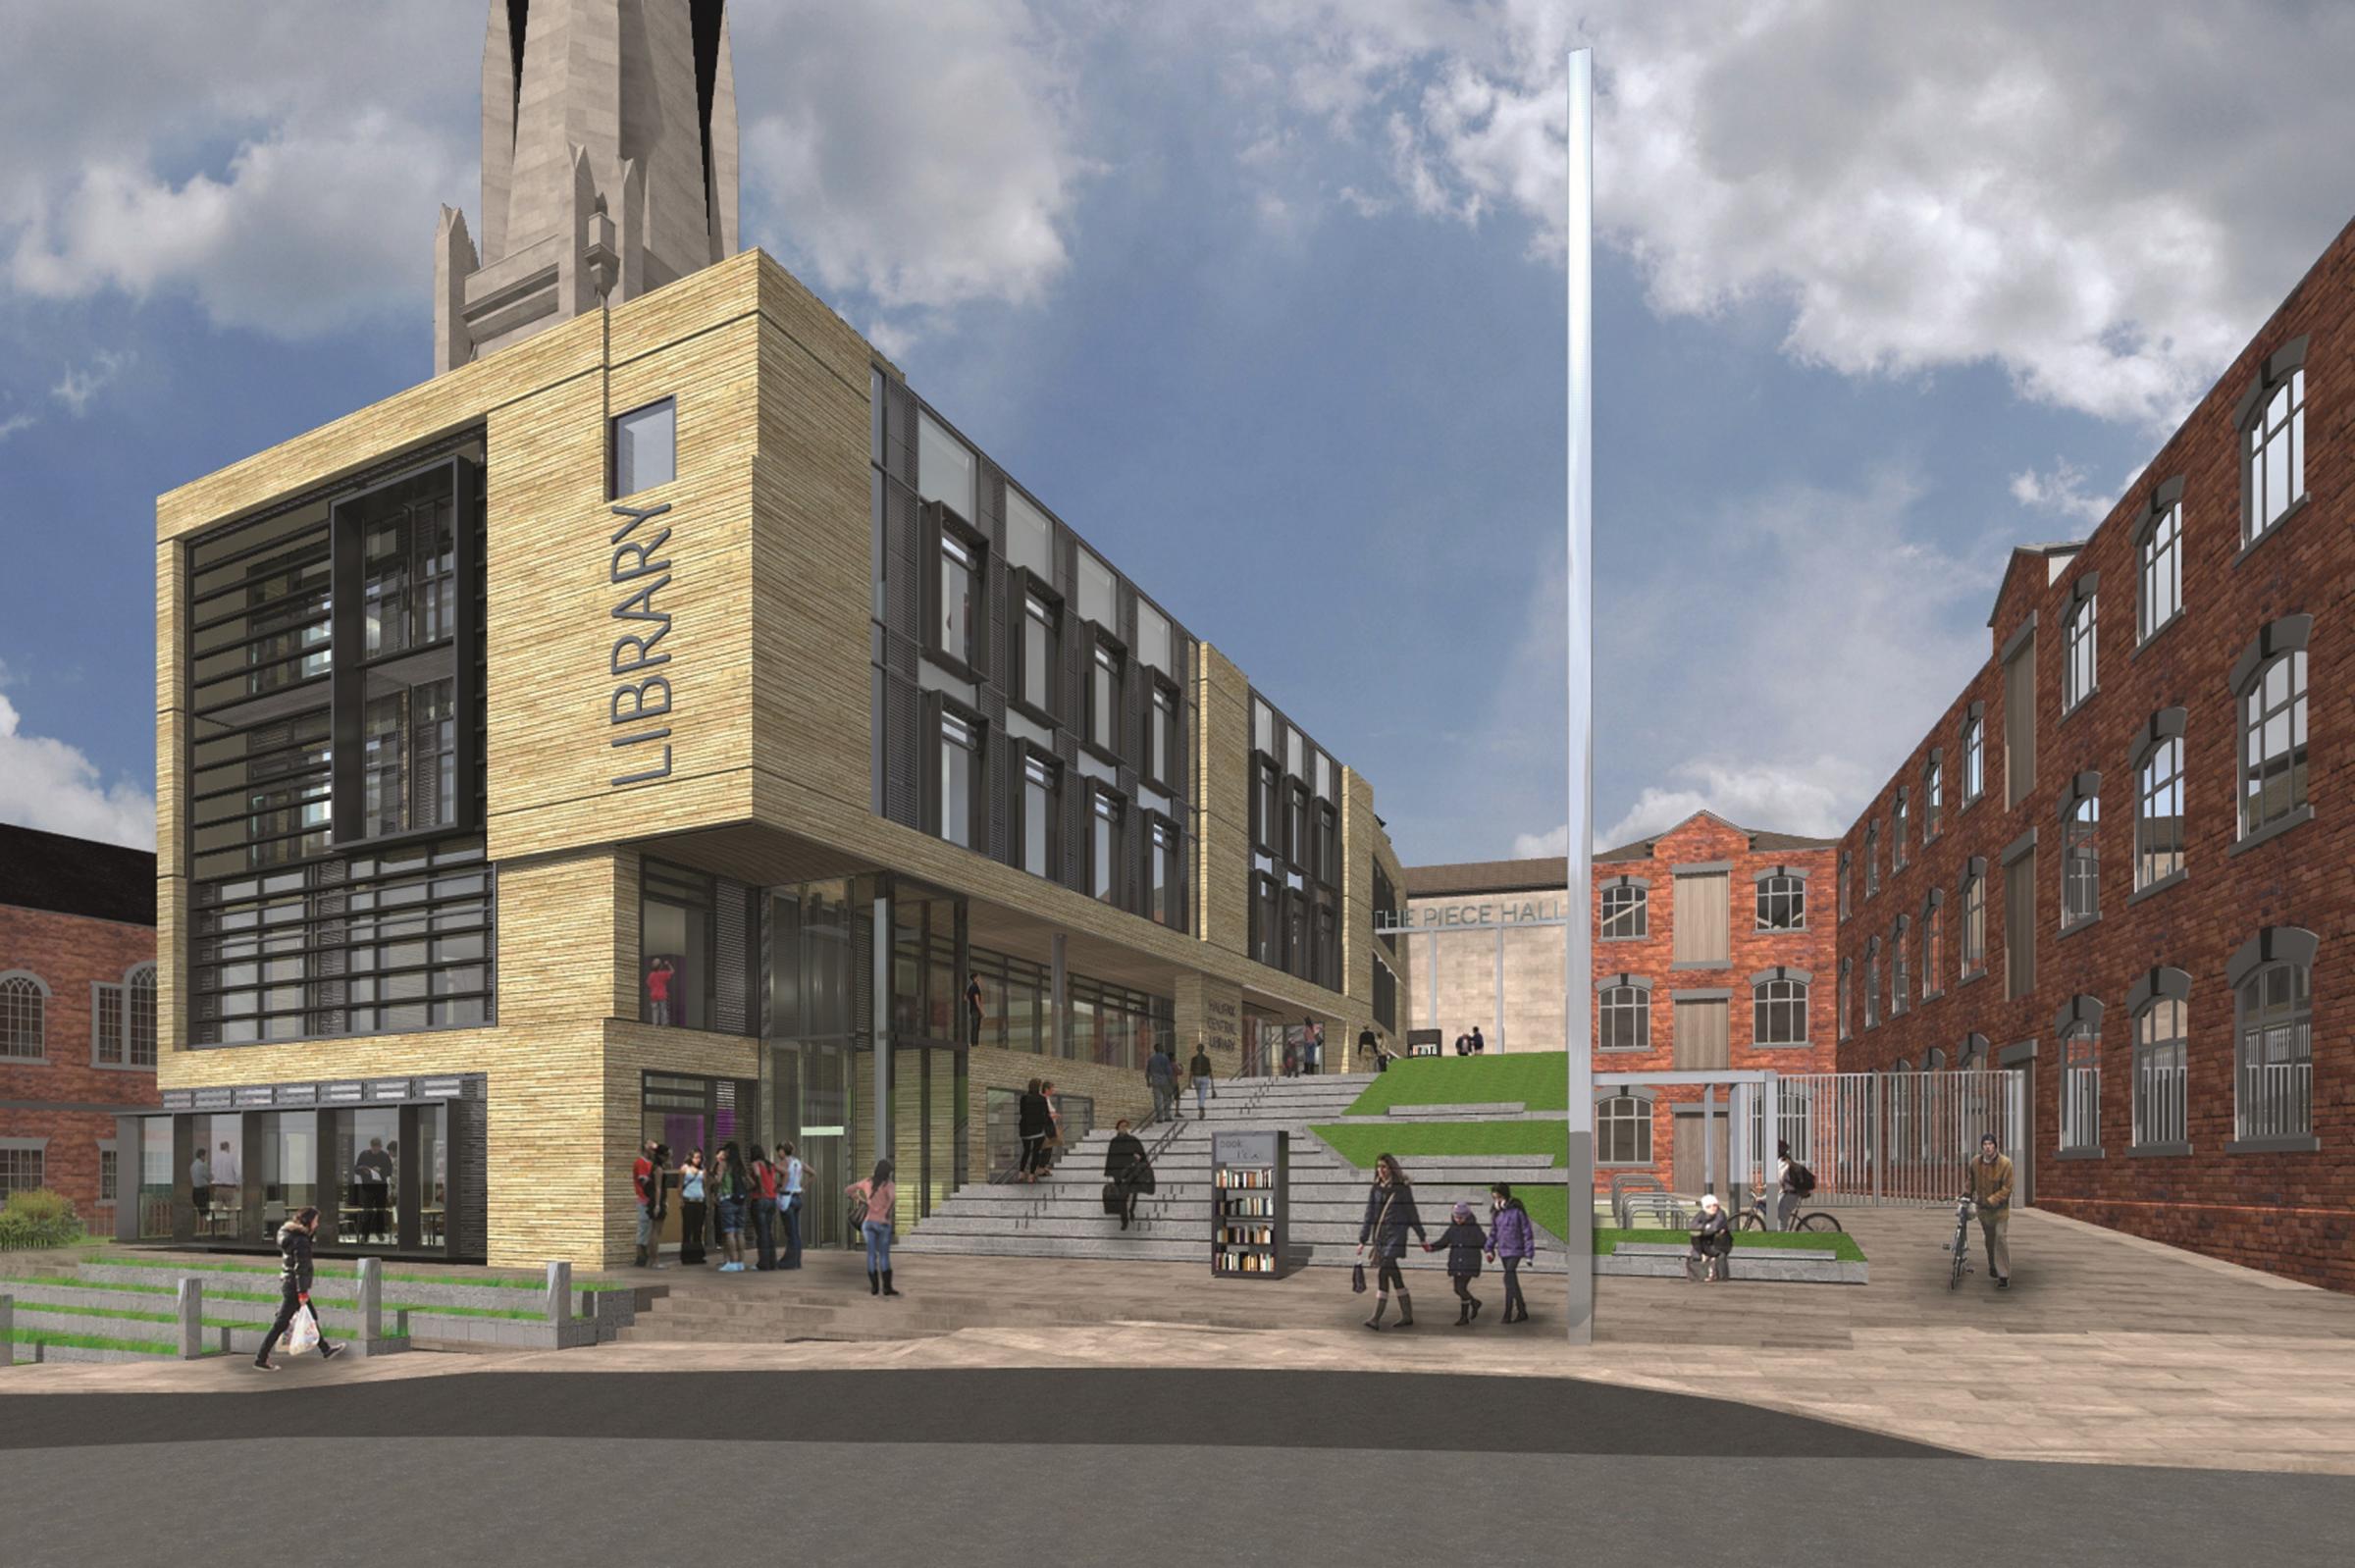 Exhibition shows how new library and archive building will look - Bradford Telegraph and Argus